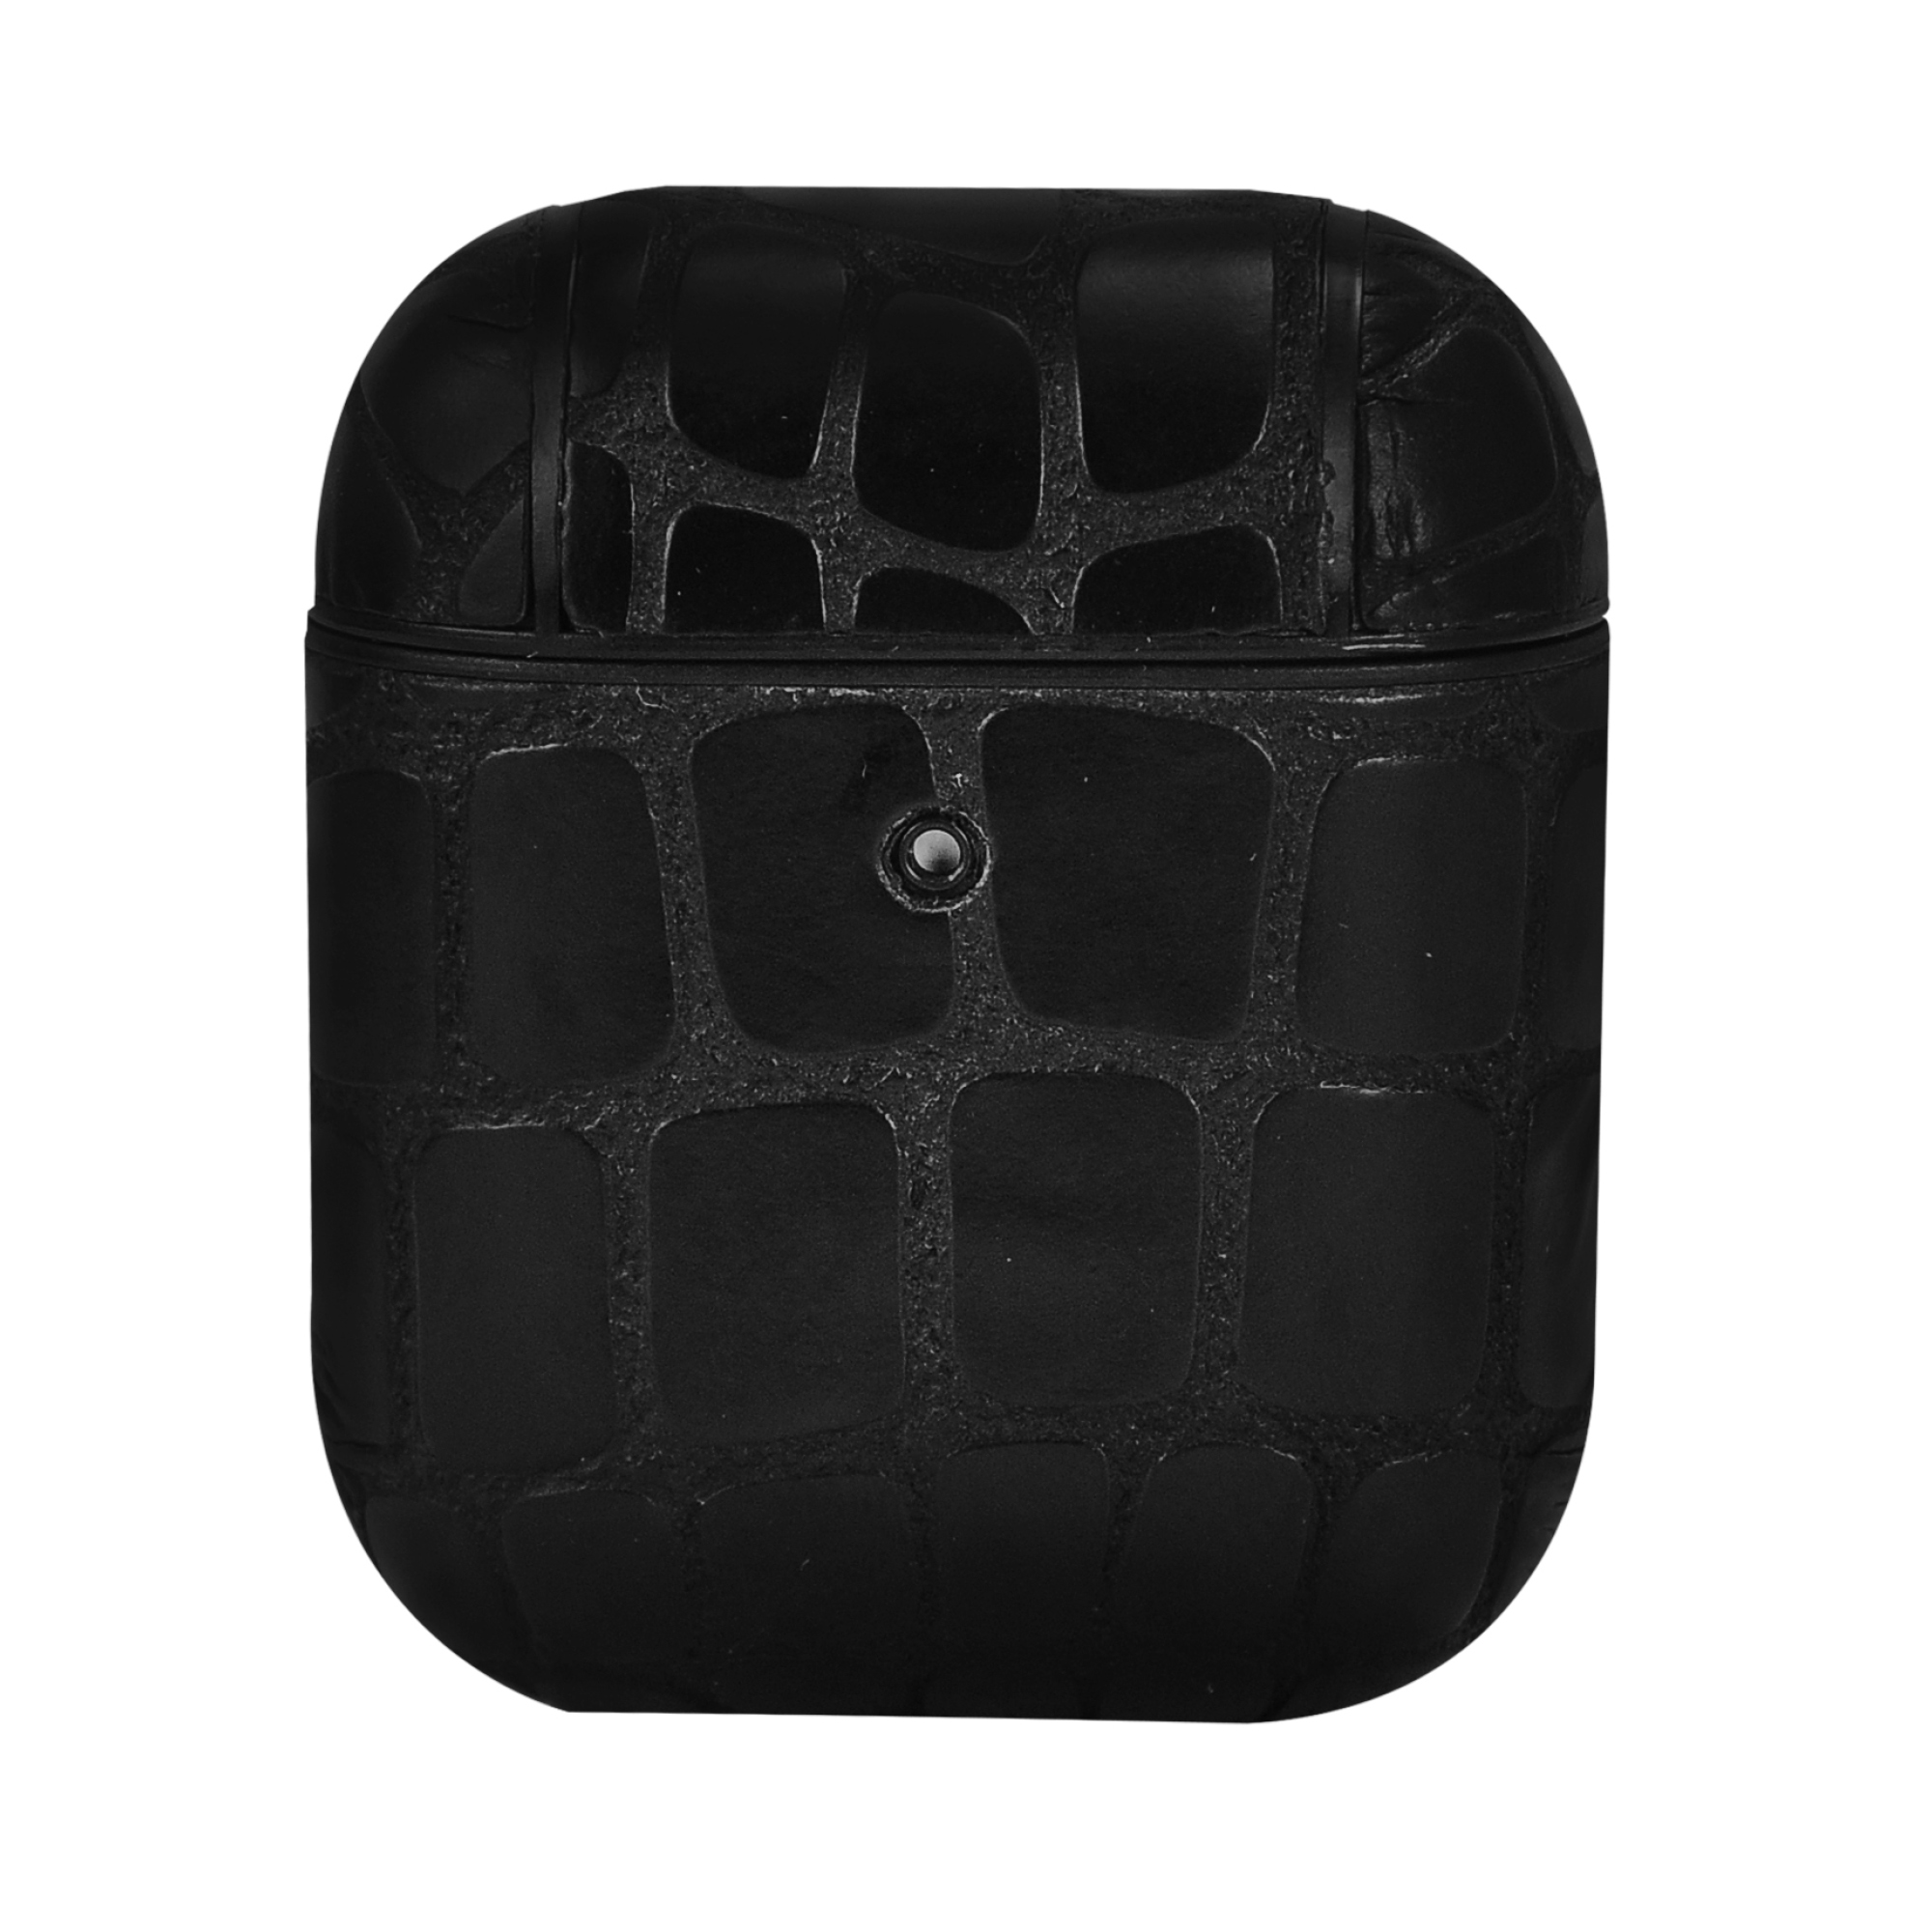 TERRATEC AirPods Case AirBox Stone Pattern Black - 306845